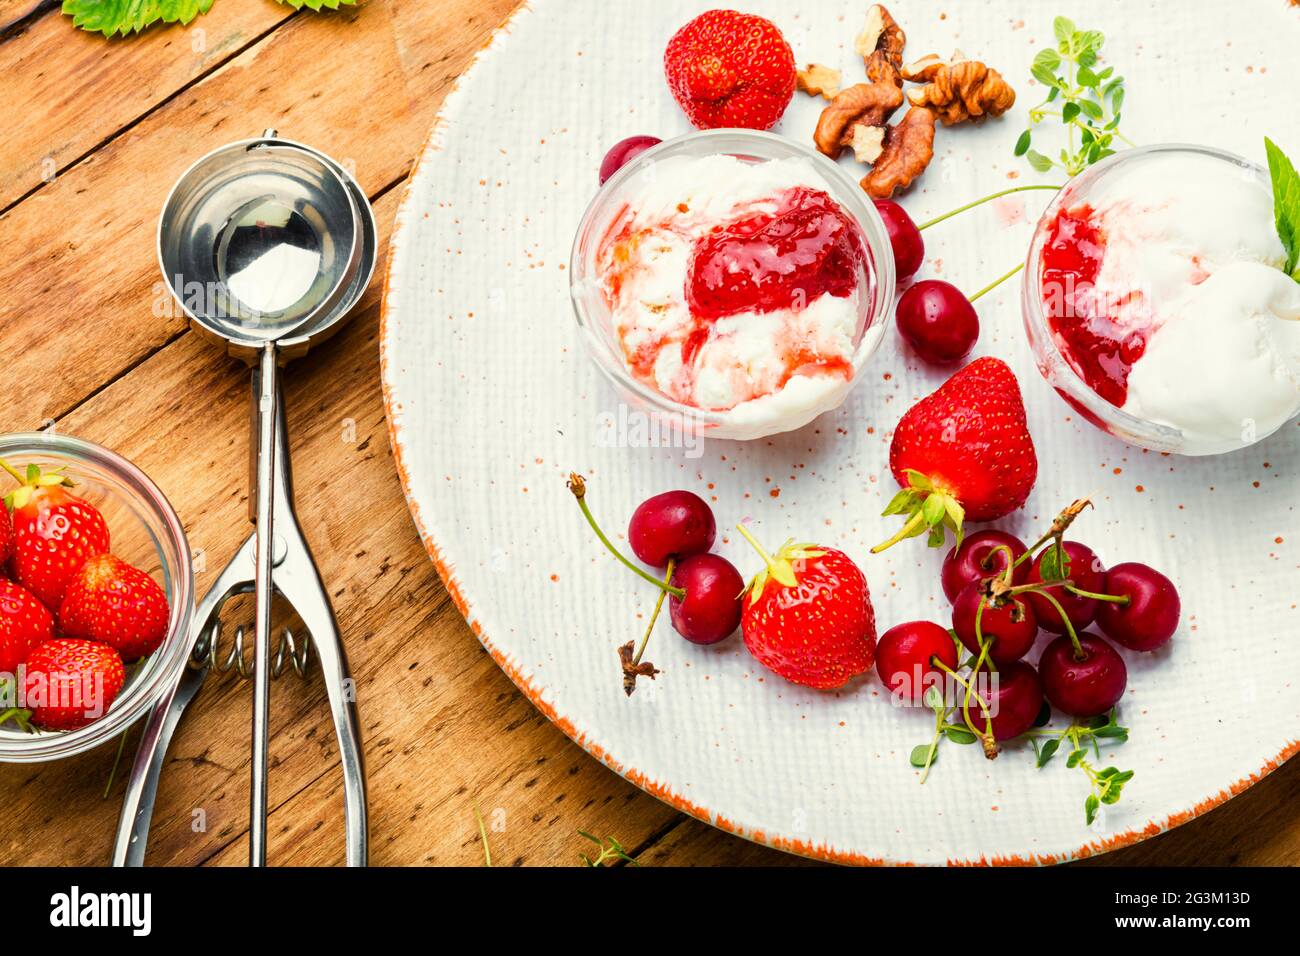 Summer dessert, ice cream with strawberries and cherries.Ice cream with berry jam on wooden table Stock Photo